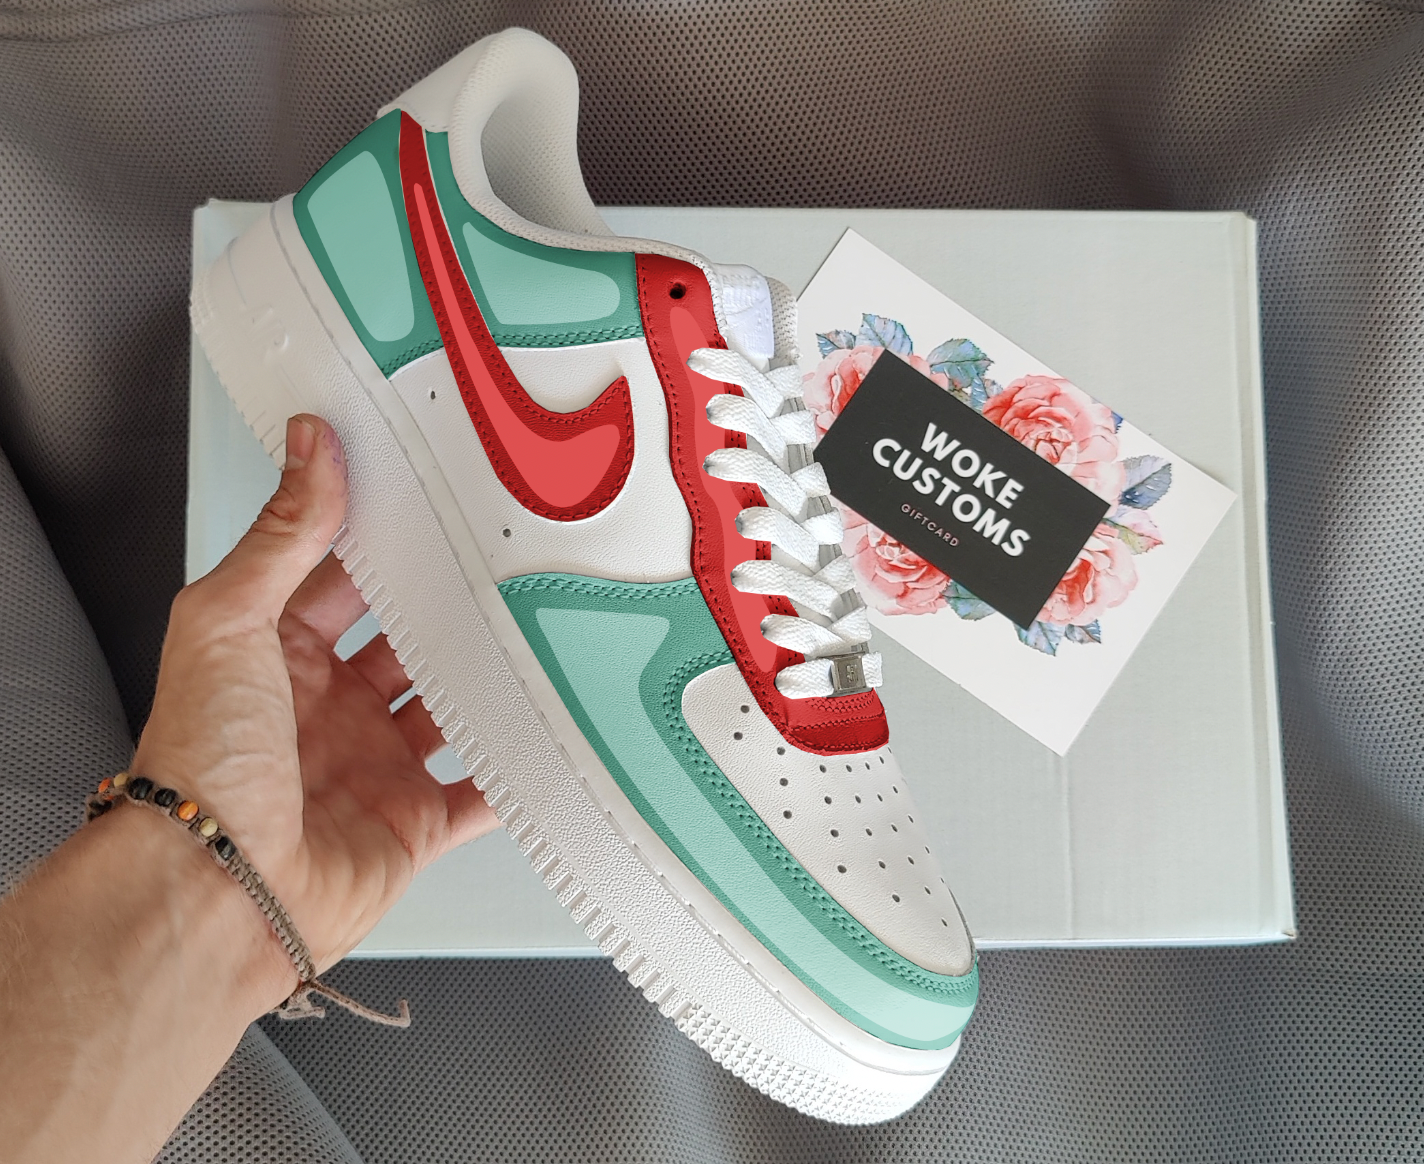 The image is of a Custom Nike Air Force 1 sneaker on a shoe box background. The custom sneakers are painted in lighter blue and red colors with shadings.